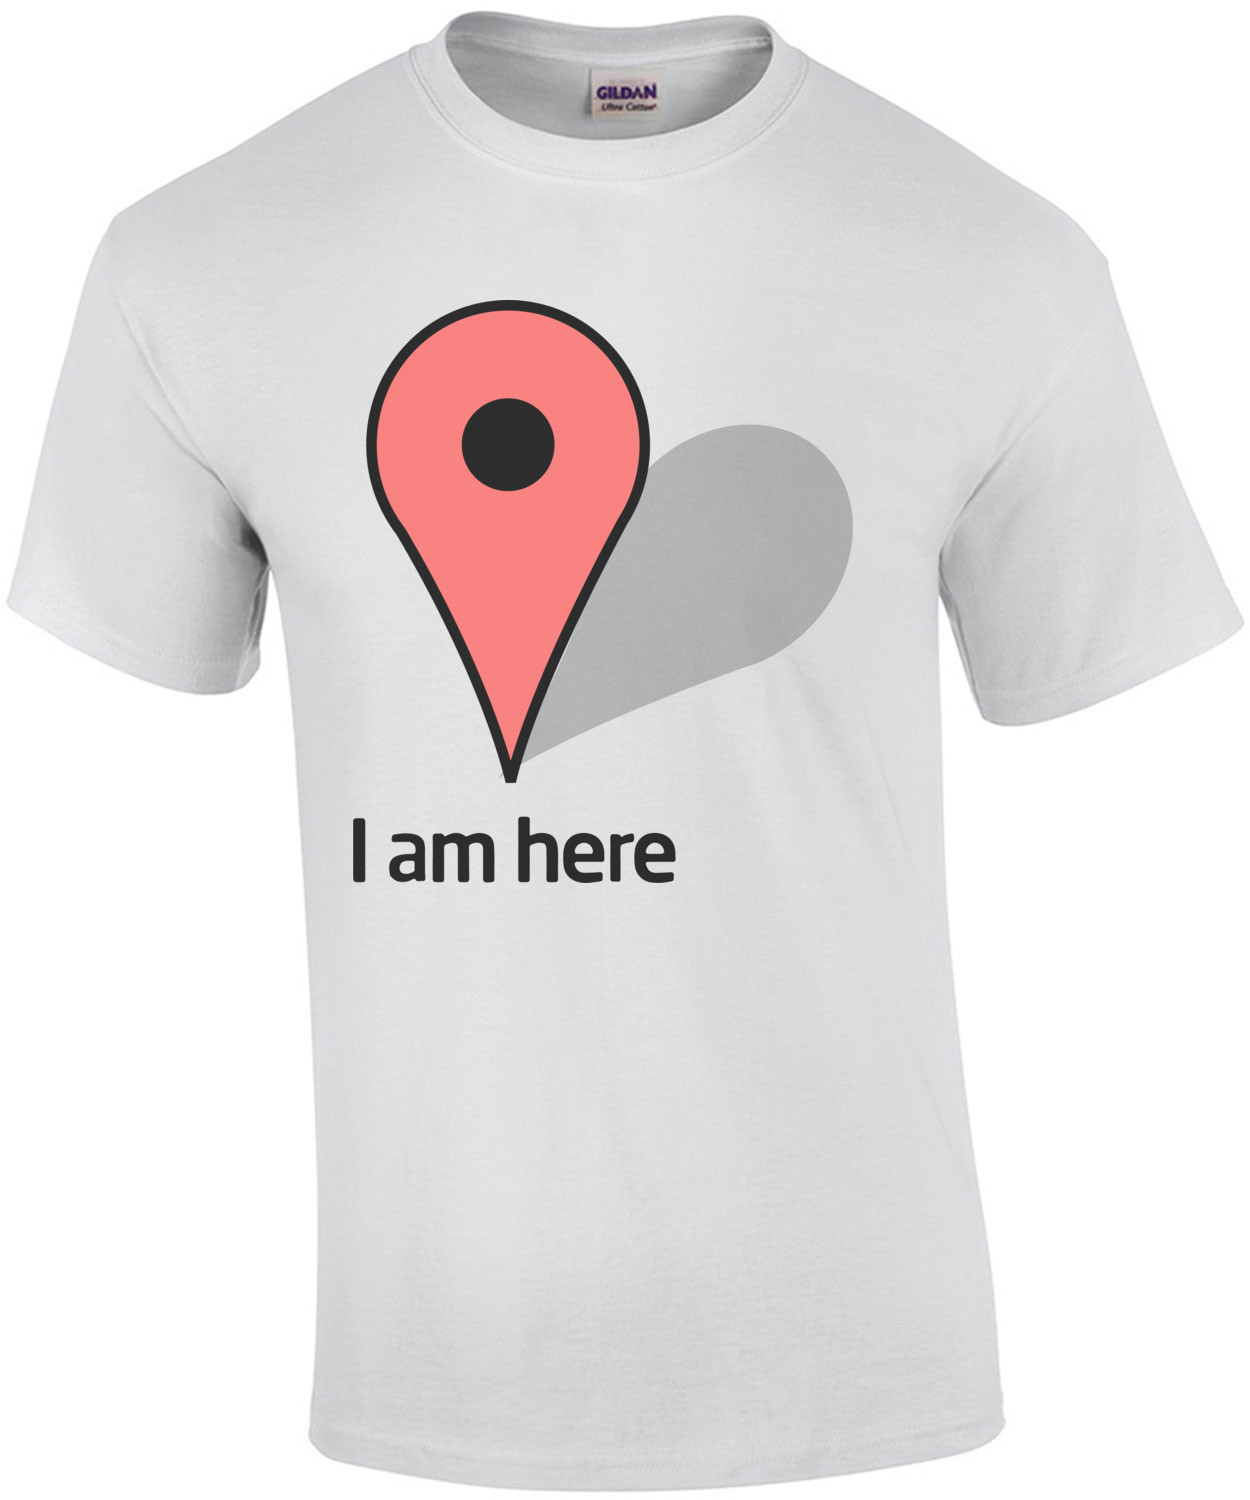 I am here - Funny T-Shirt